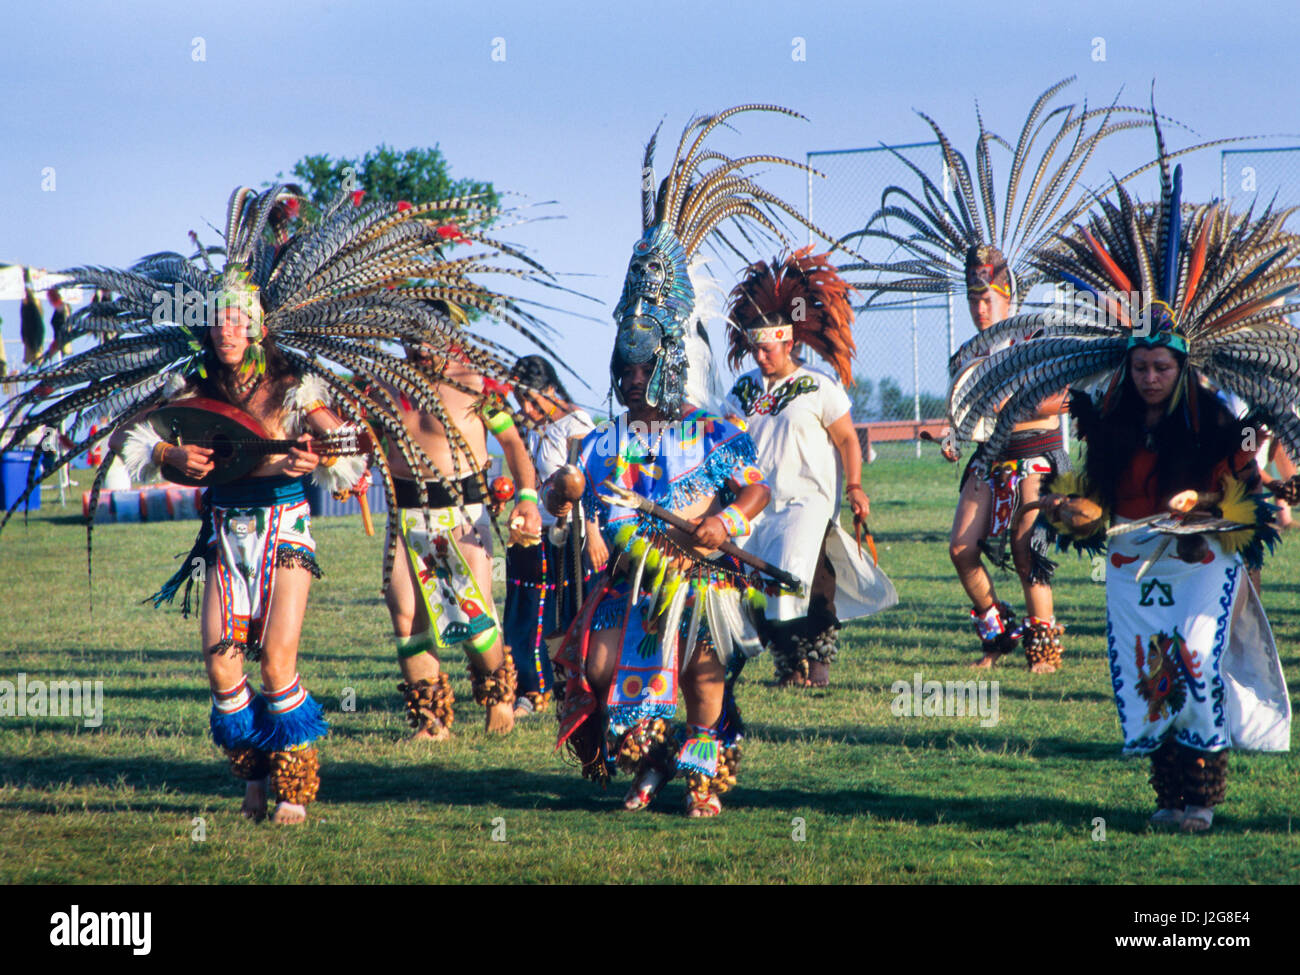 Large group of Aztec dancers display their traditions during a ceremonial presentation at a gathering in Malibu Beach California Stock Photo